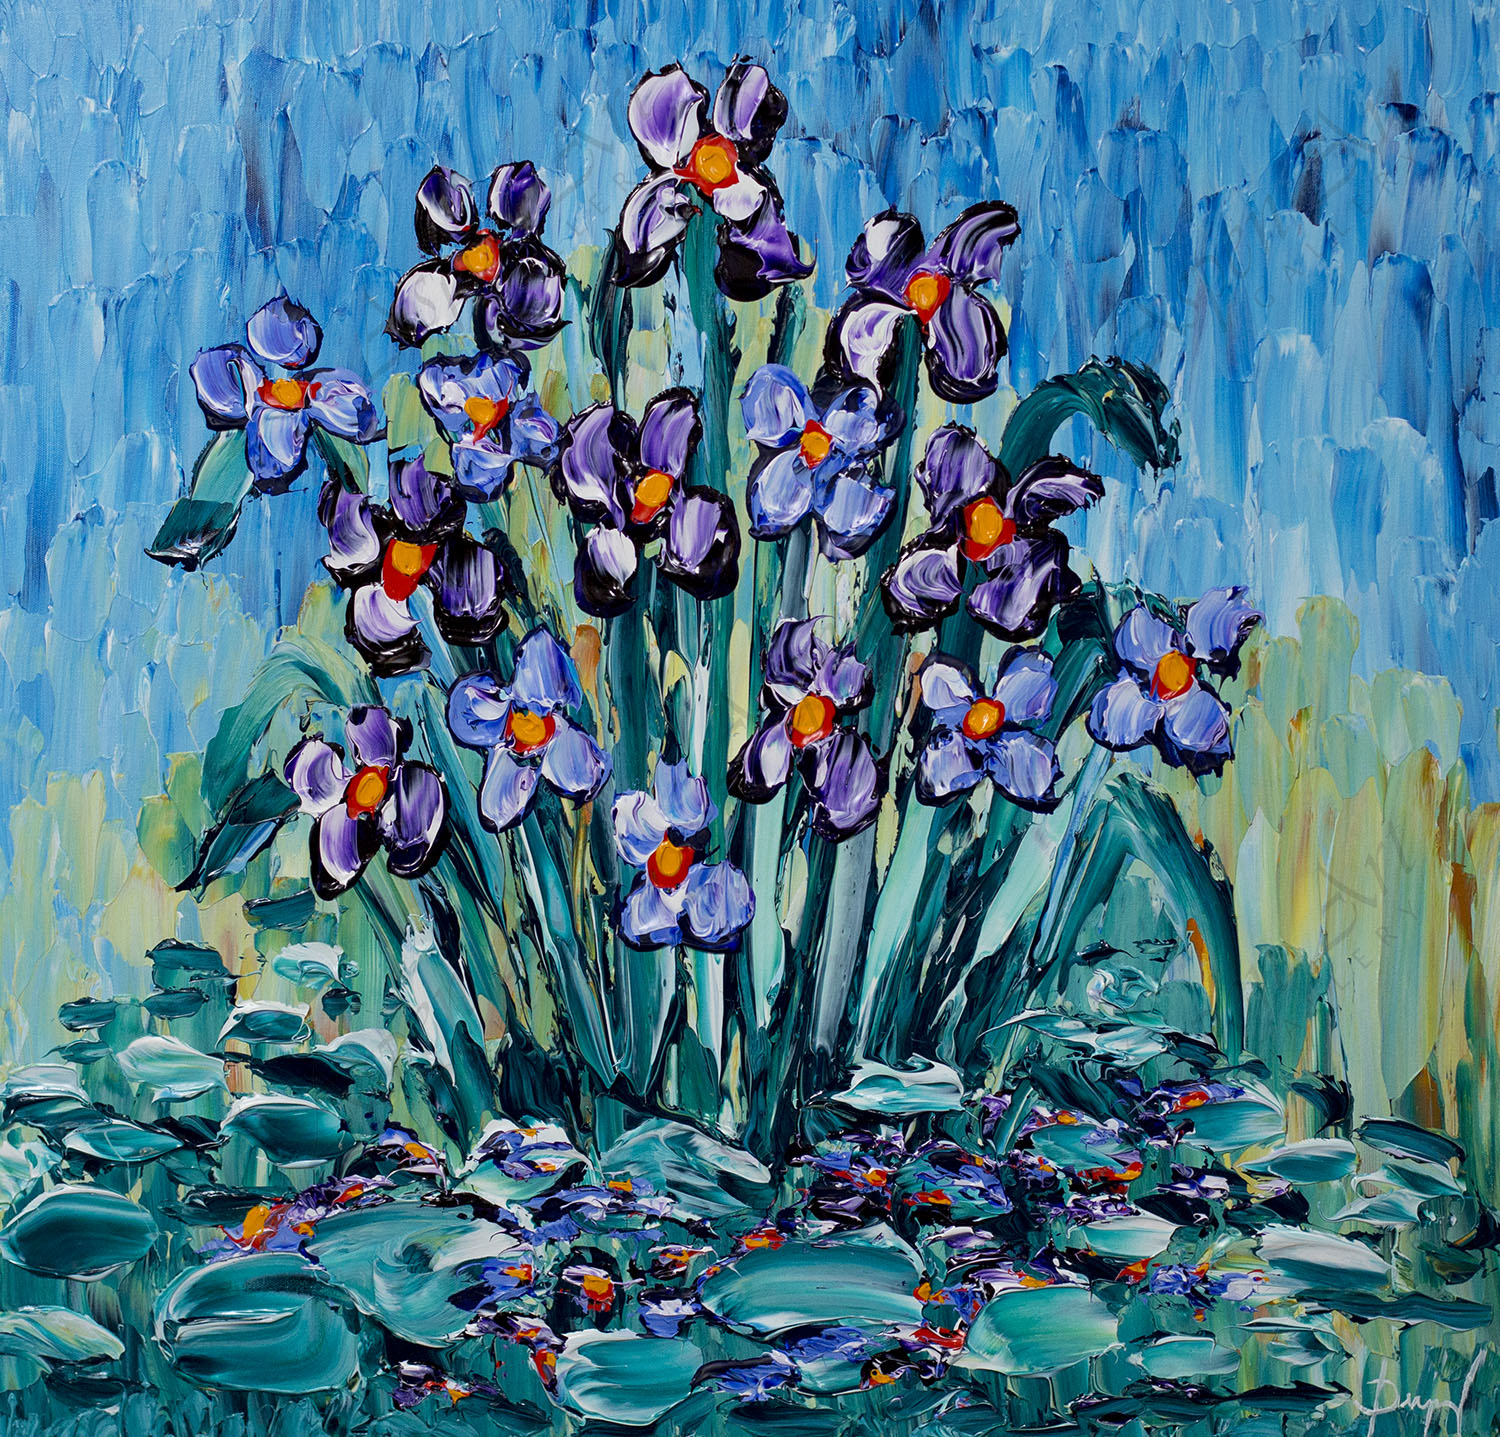 Irises of Colorful Blossoming 30x30